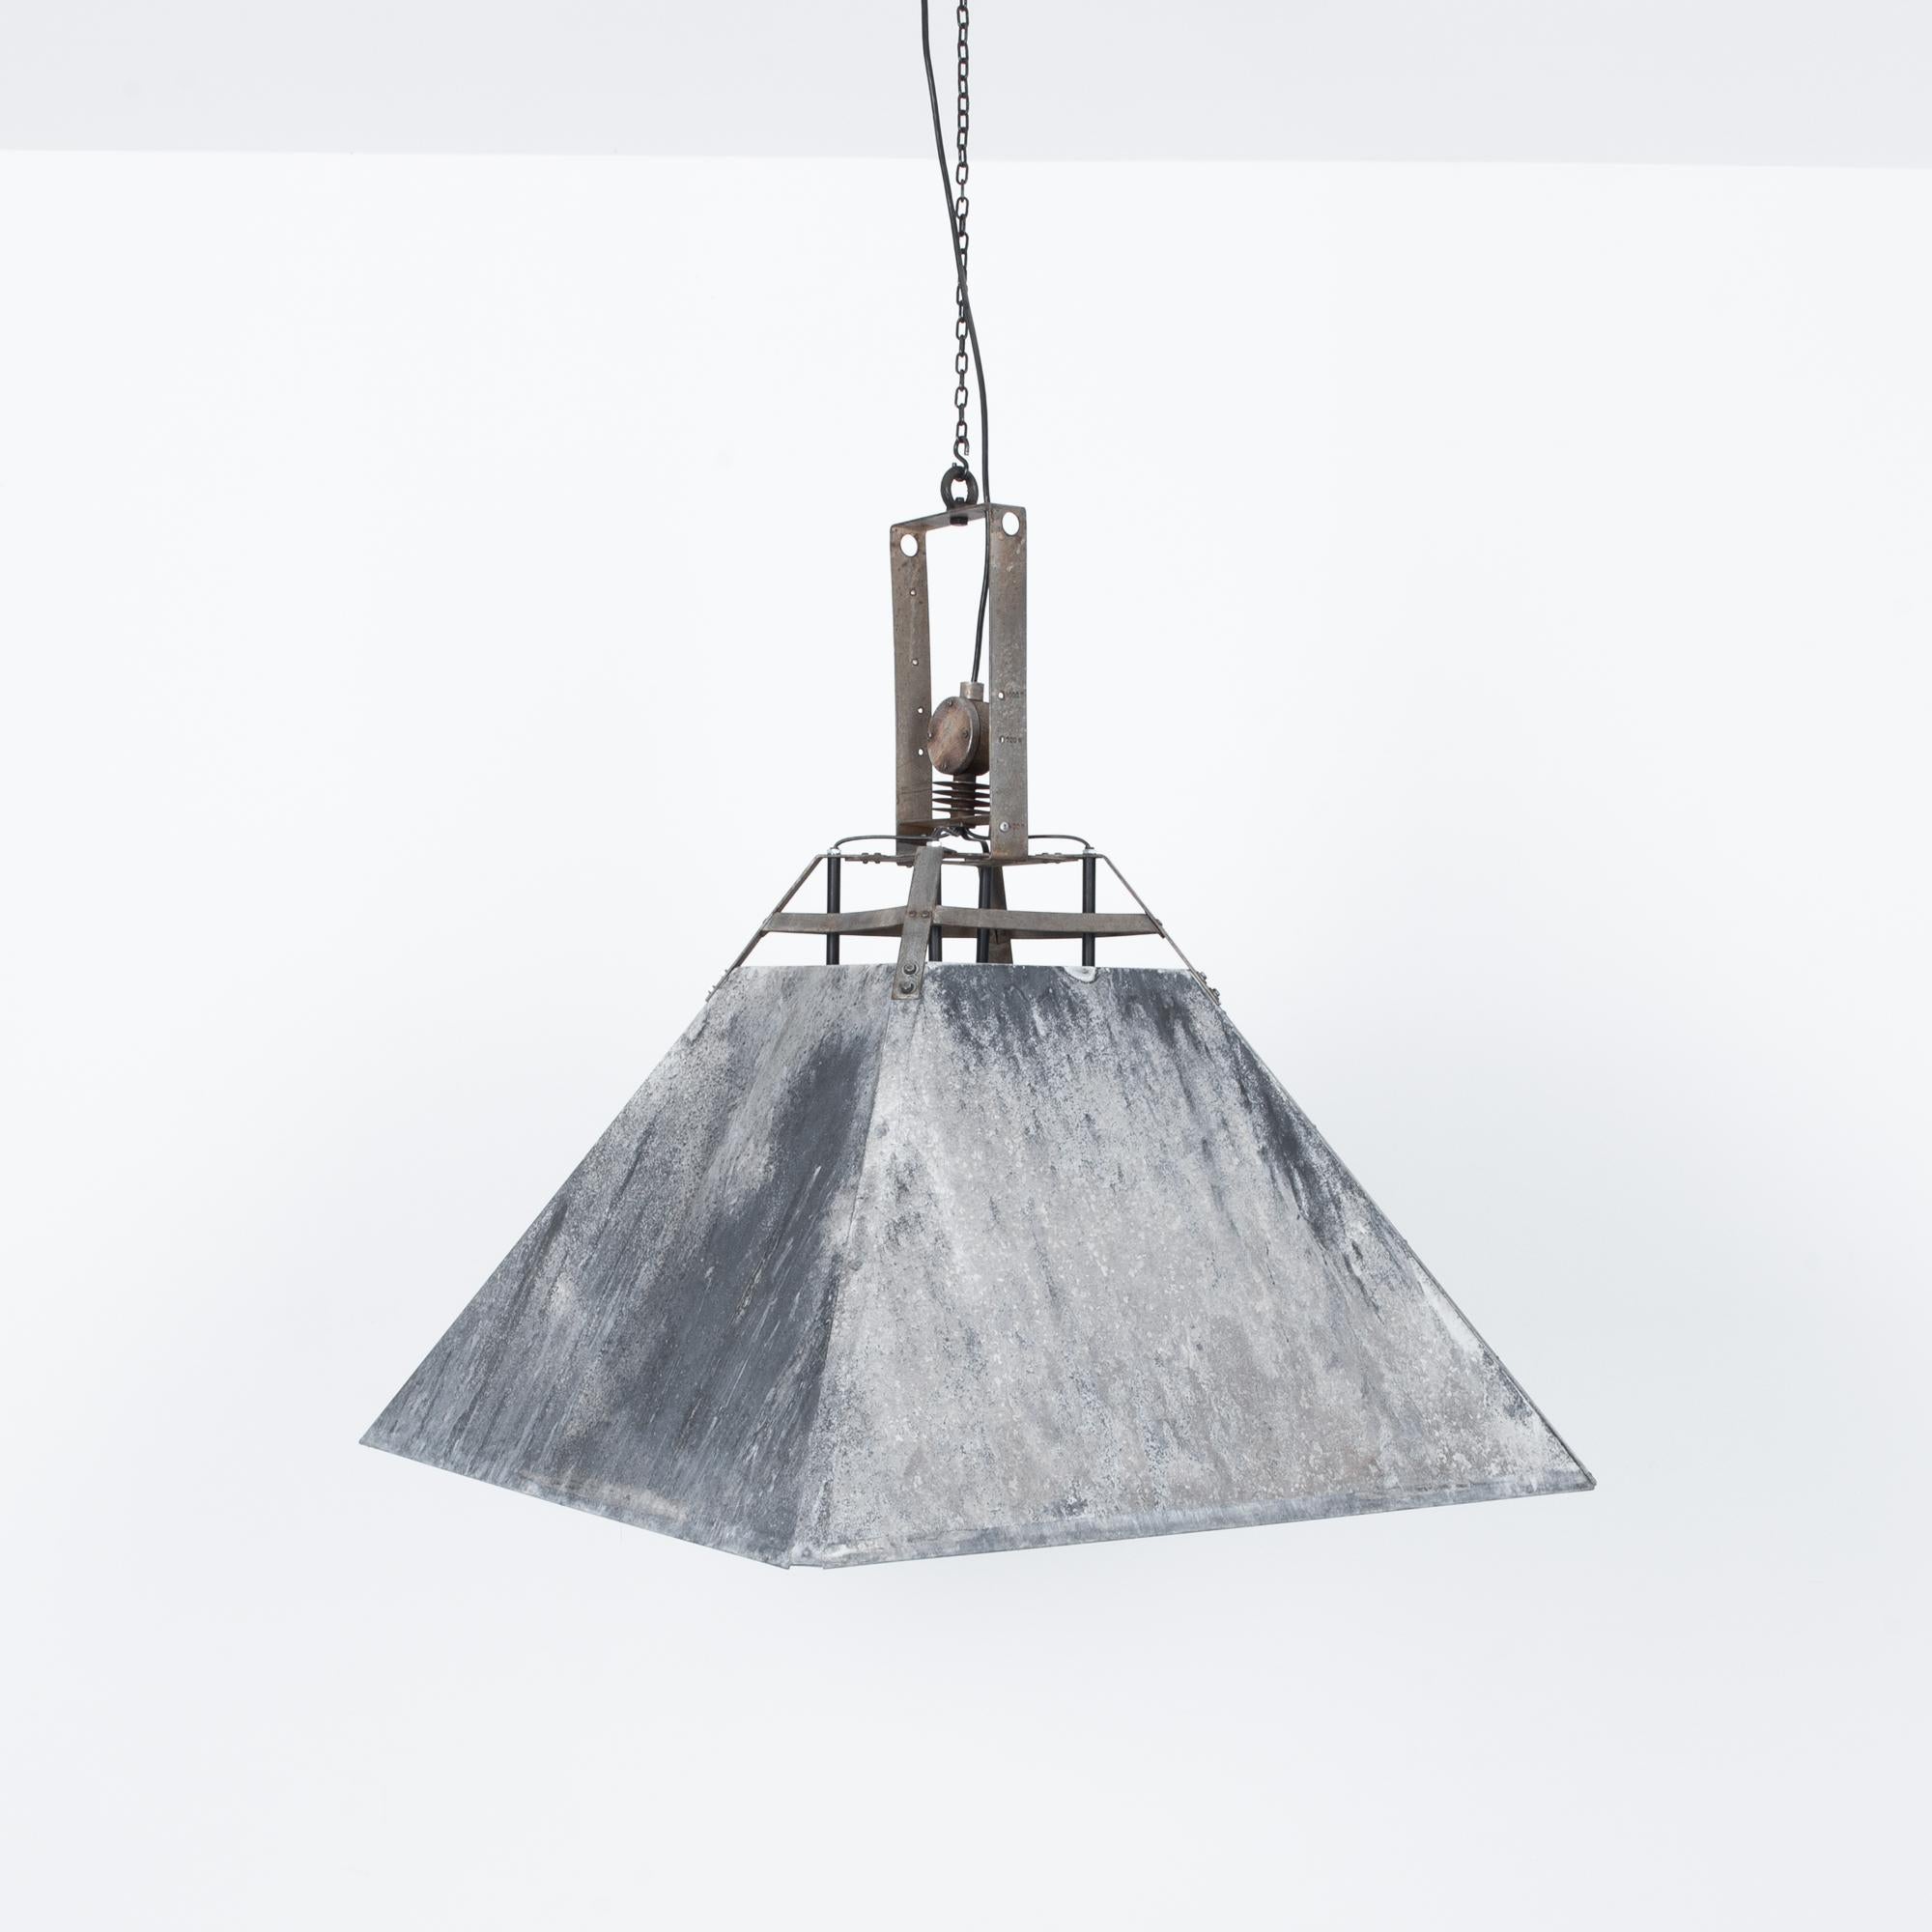 Light grey color industrial lighting fixture. Unique oxidized aluminium finish, with dark textured patina. Originally from the 1970s this large pendant has been re-wired and fitted with four E26 sockets. Heavy duty hardware in galvanized steel, the